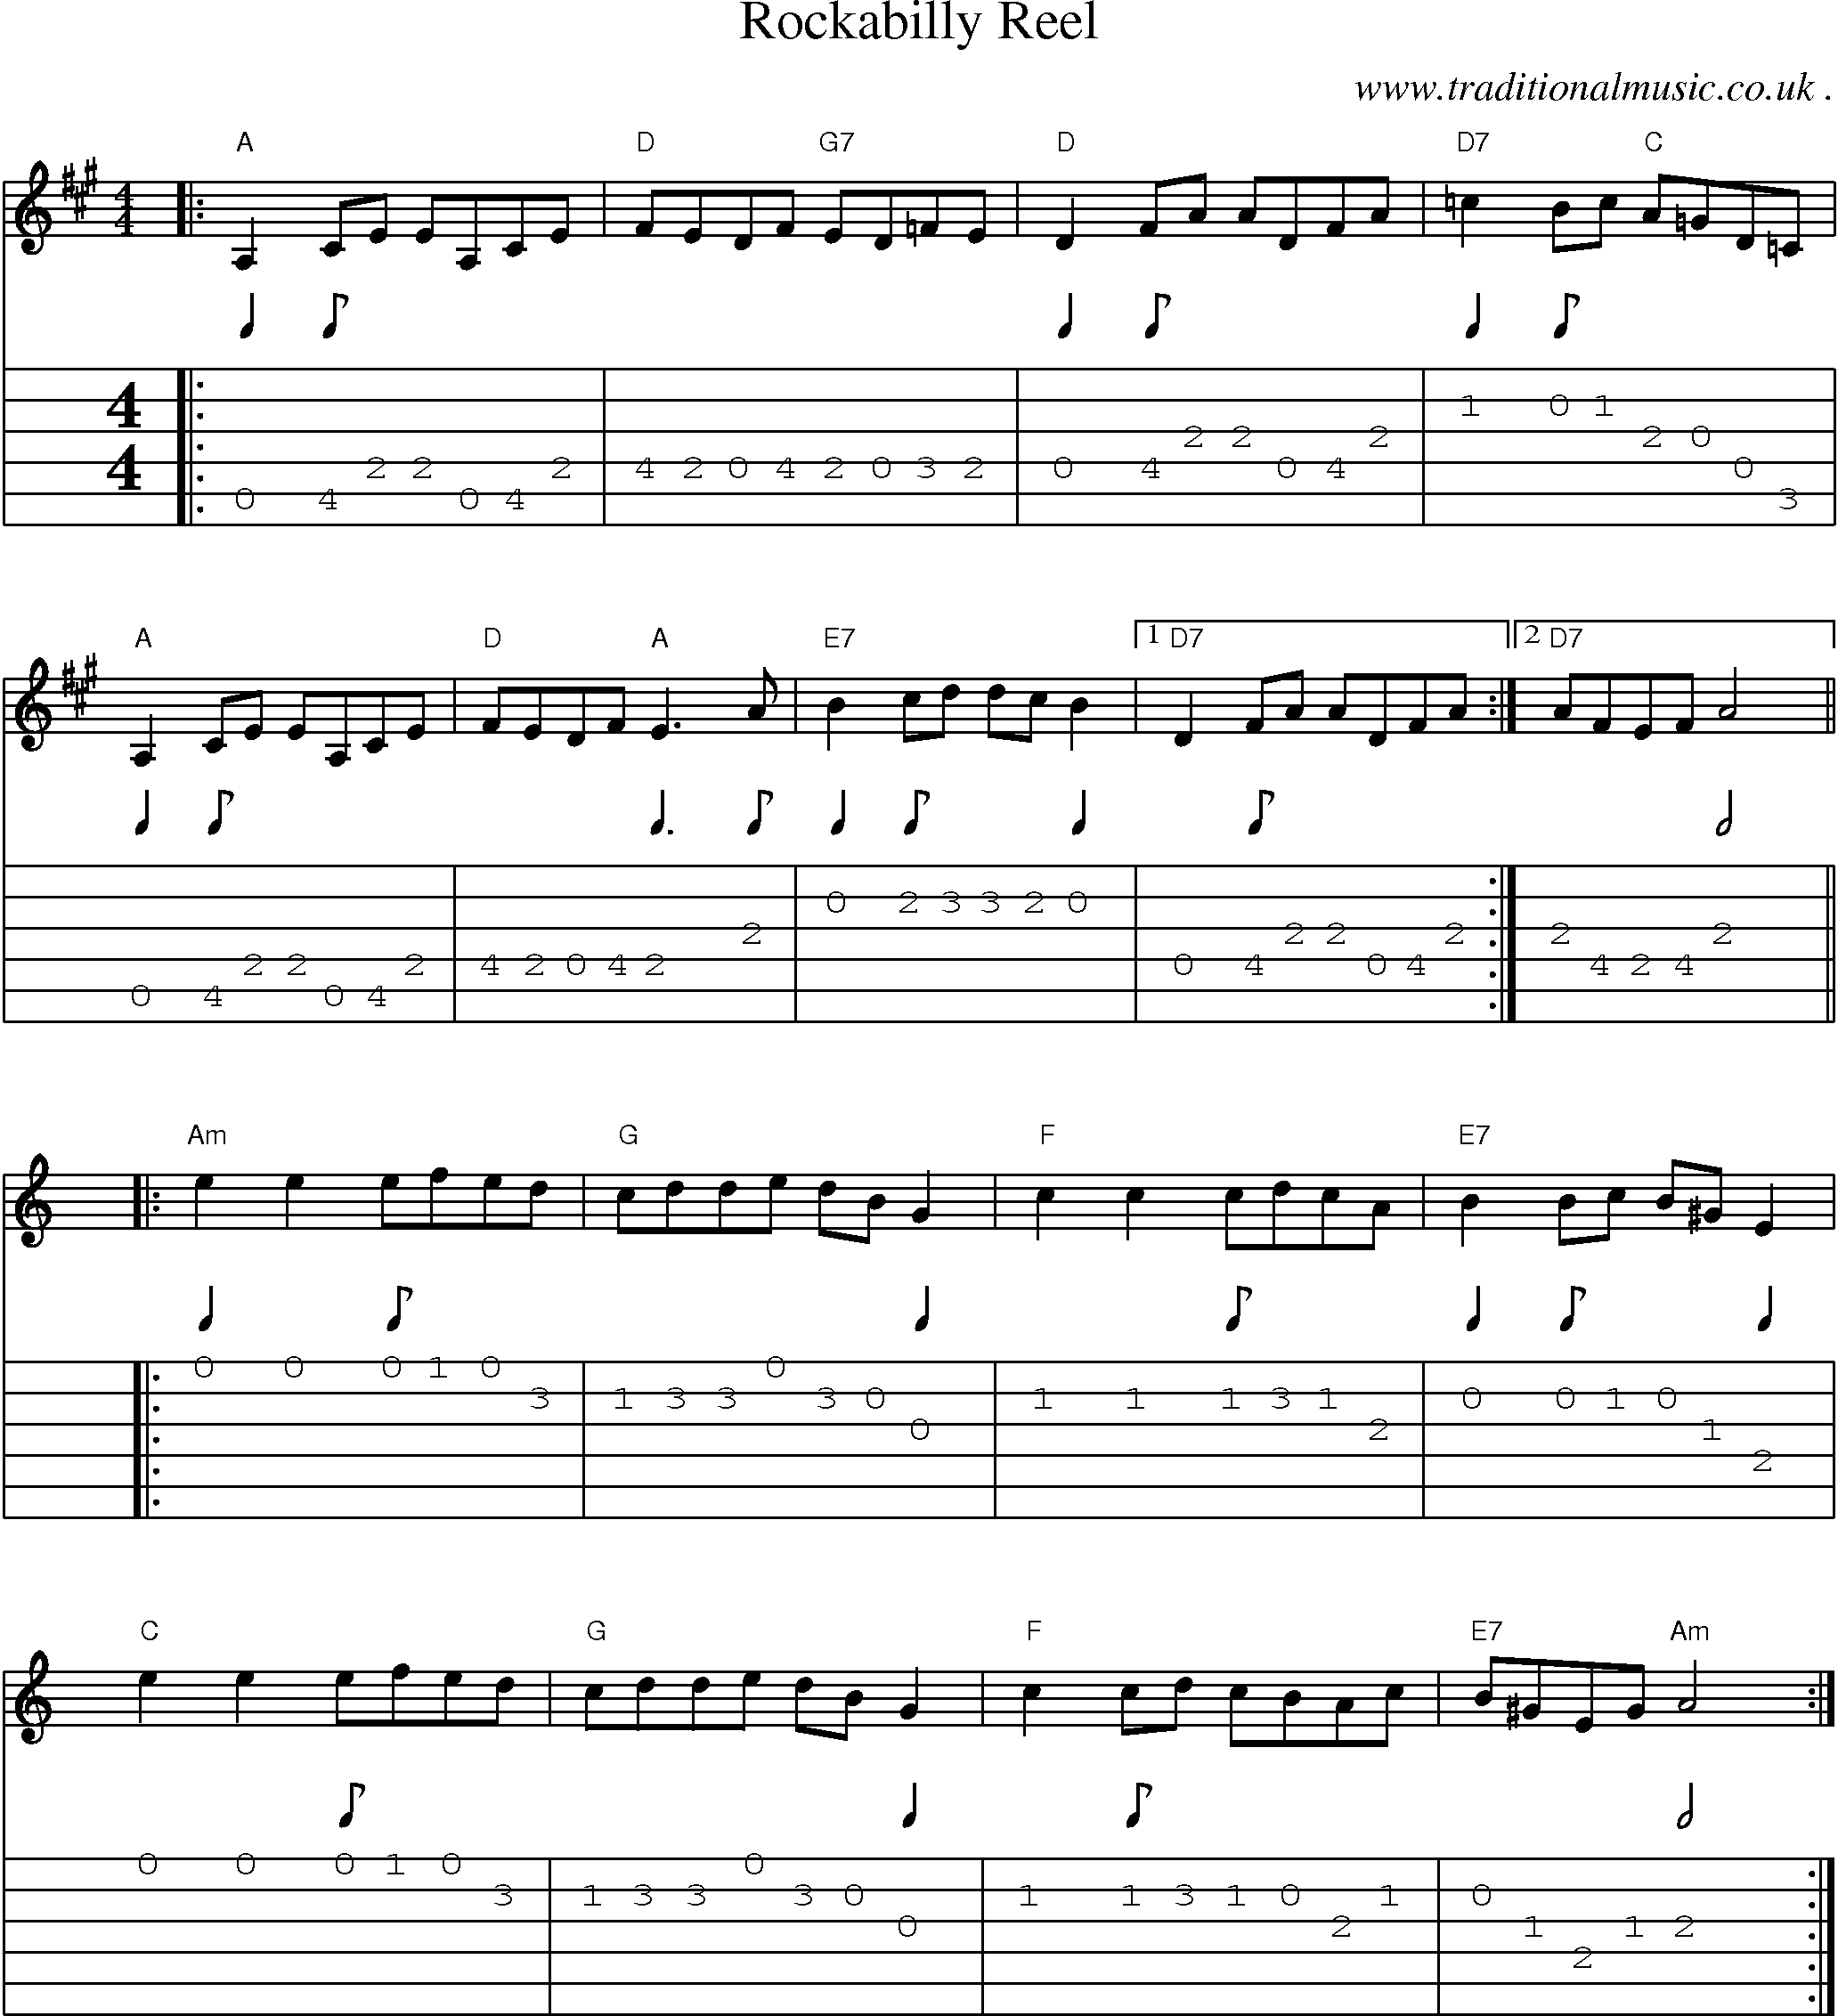 Music Score and Guitar Tabs for Rockabilly Reel